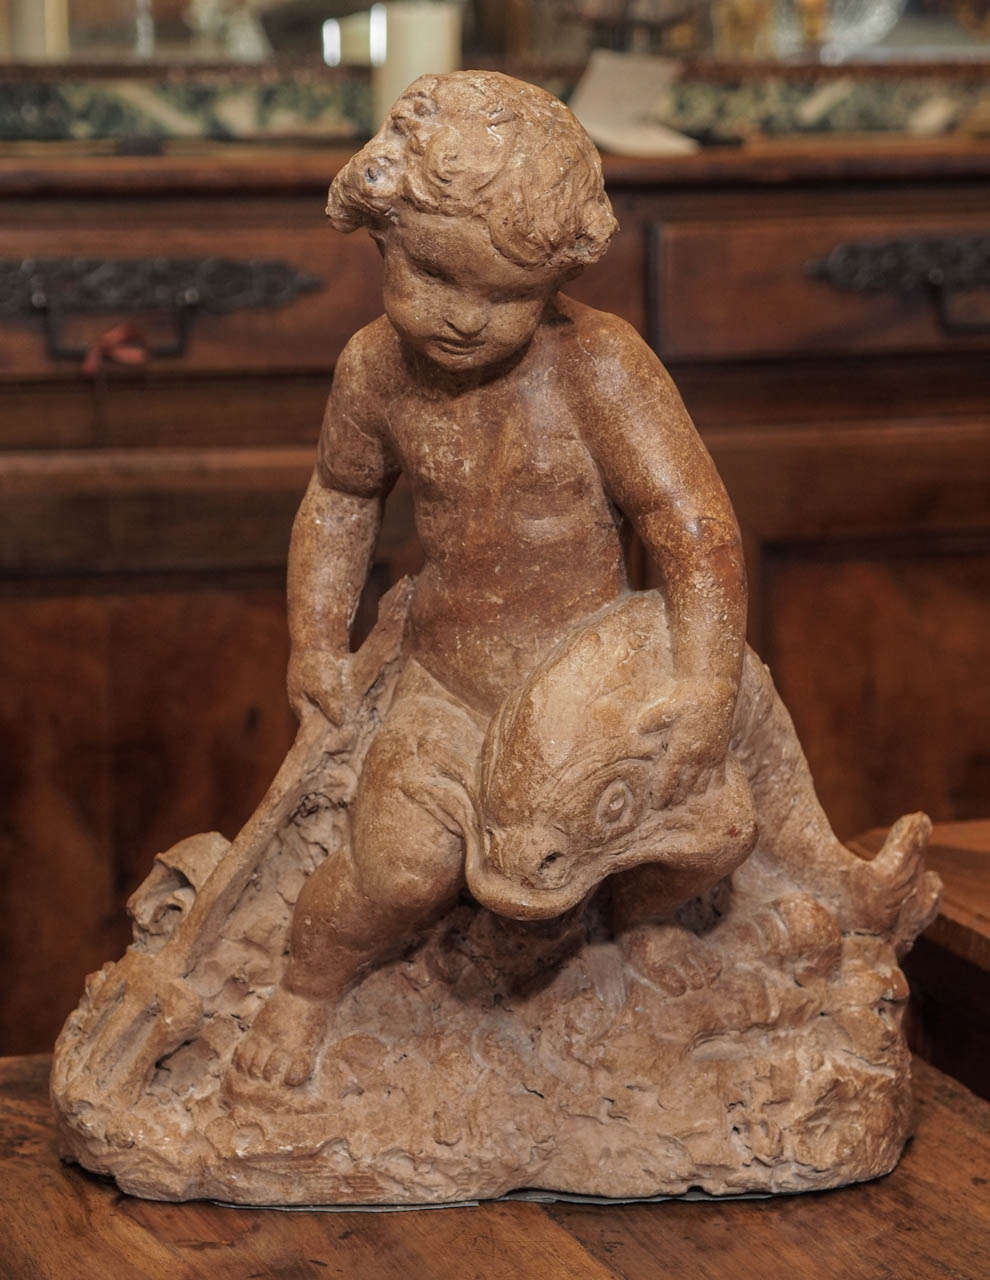 A 19th century French terra cotta statue depicting a putto holding a trident and a dolphin.